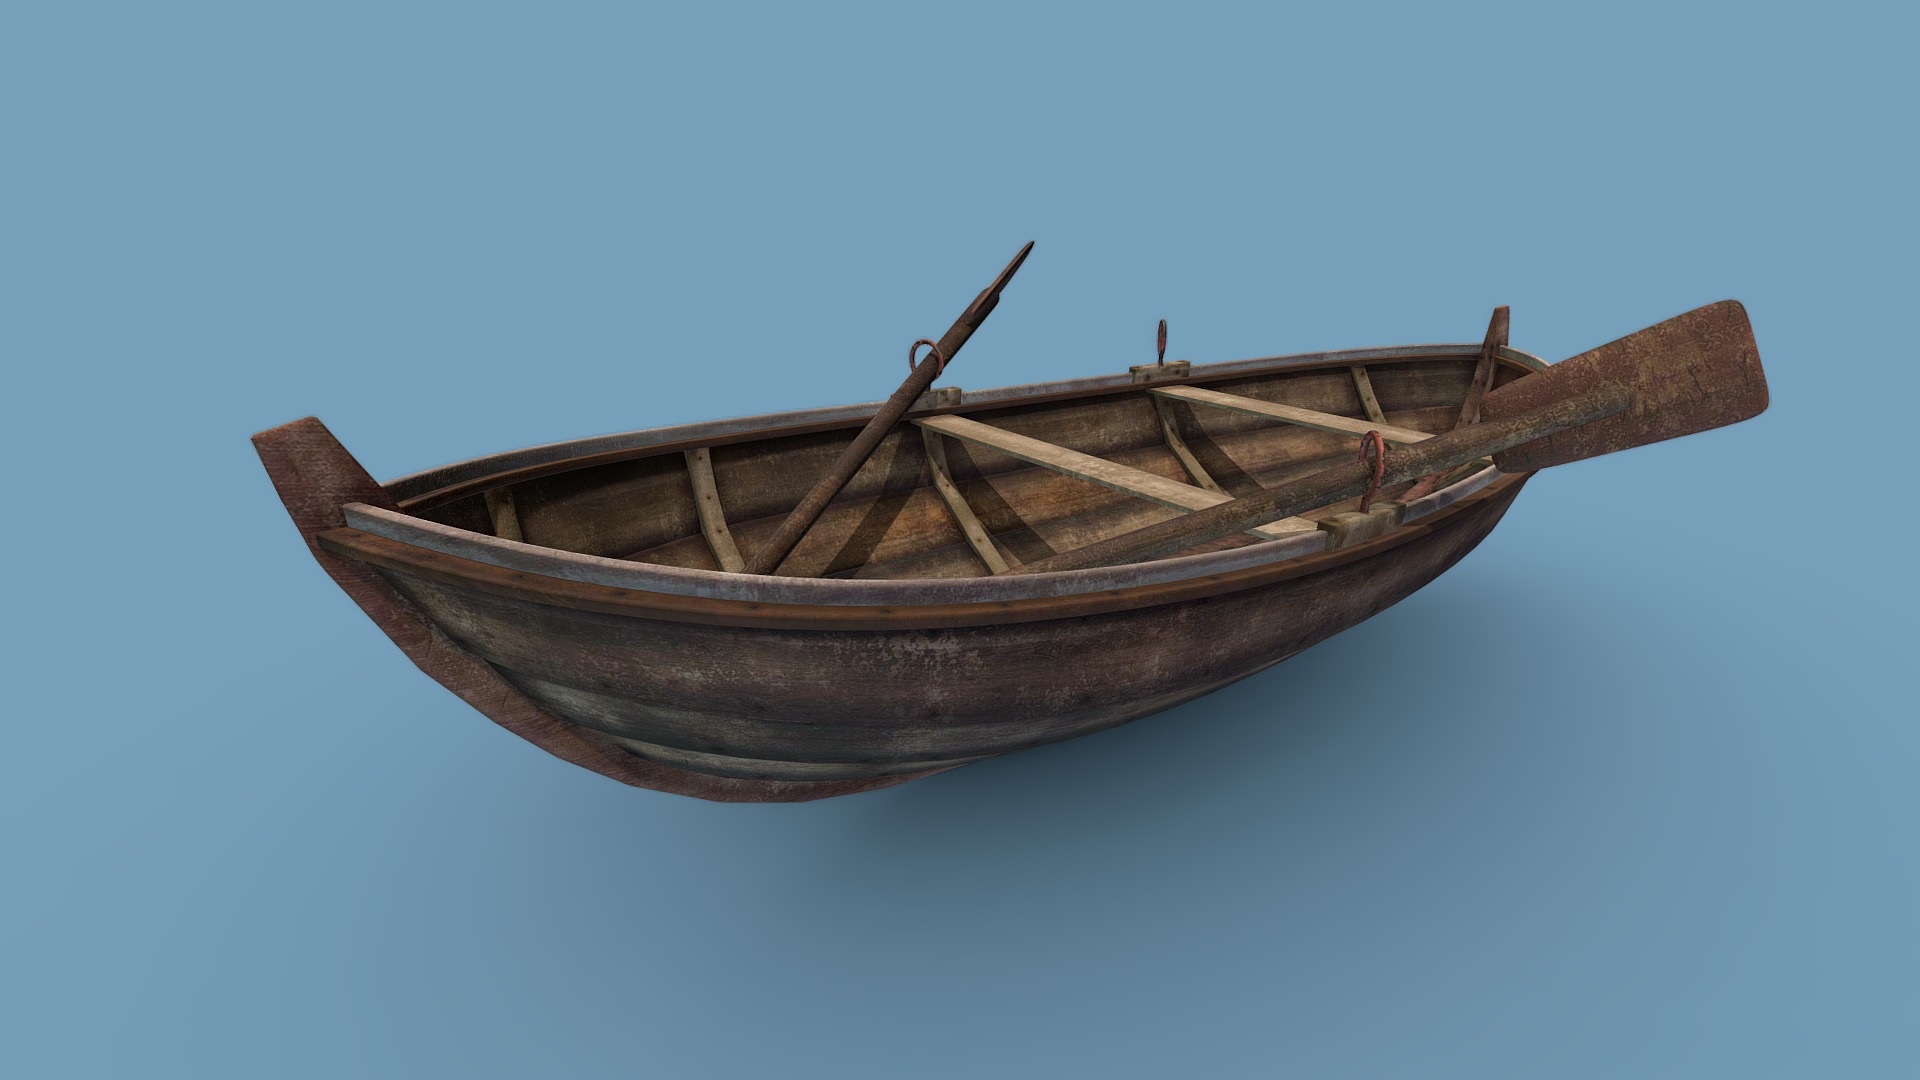 3D model Boat - This is a 3D model of the Boat. The 3D model is about a wooden boat on a blue background.